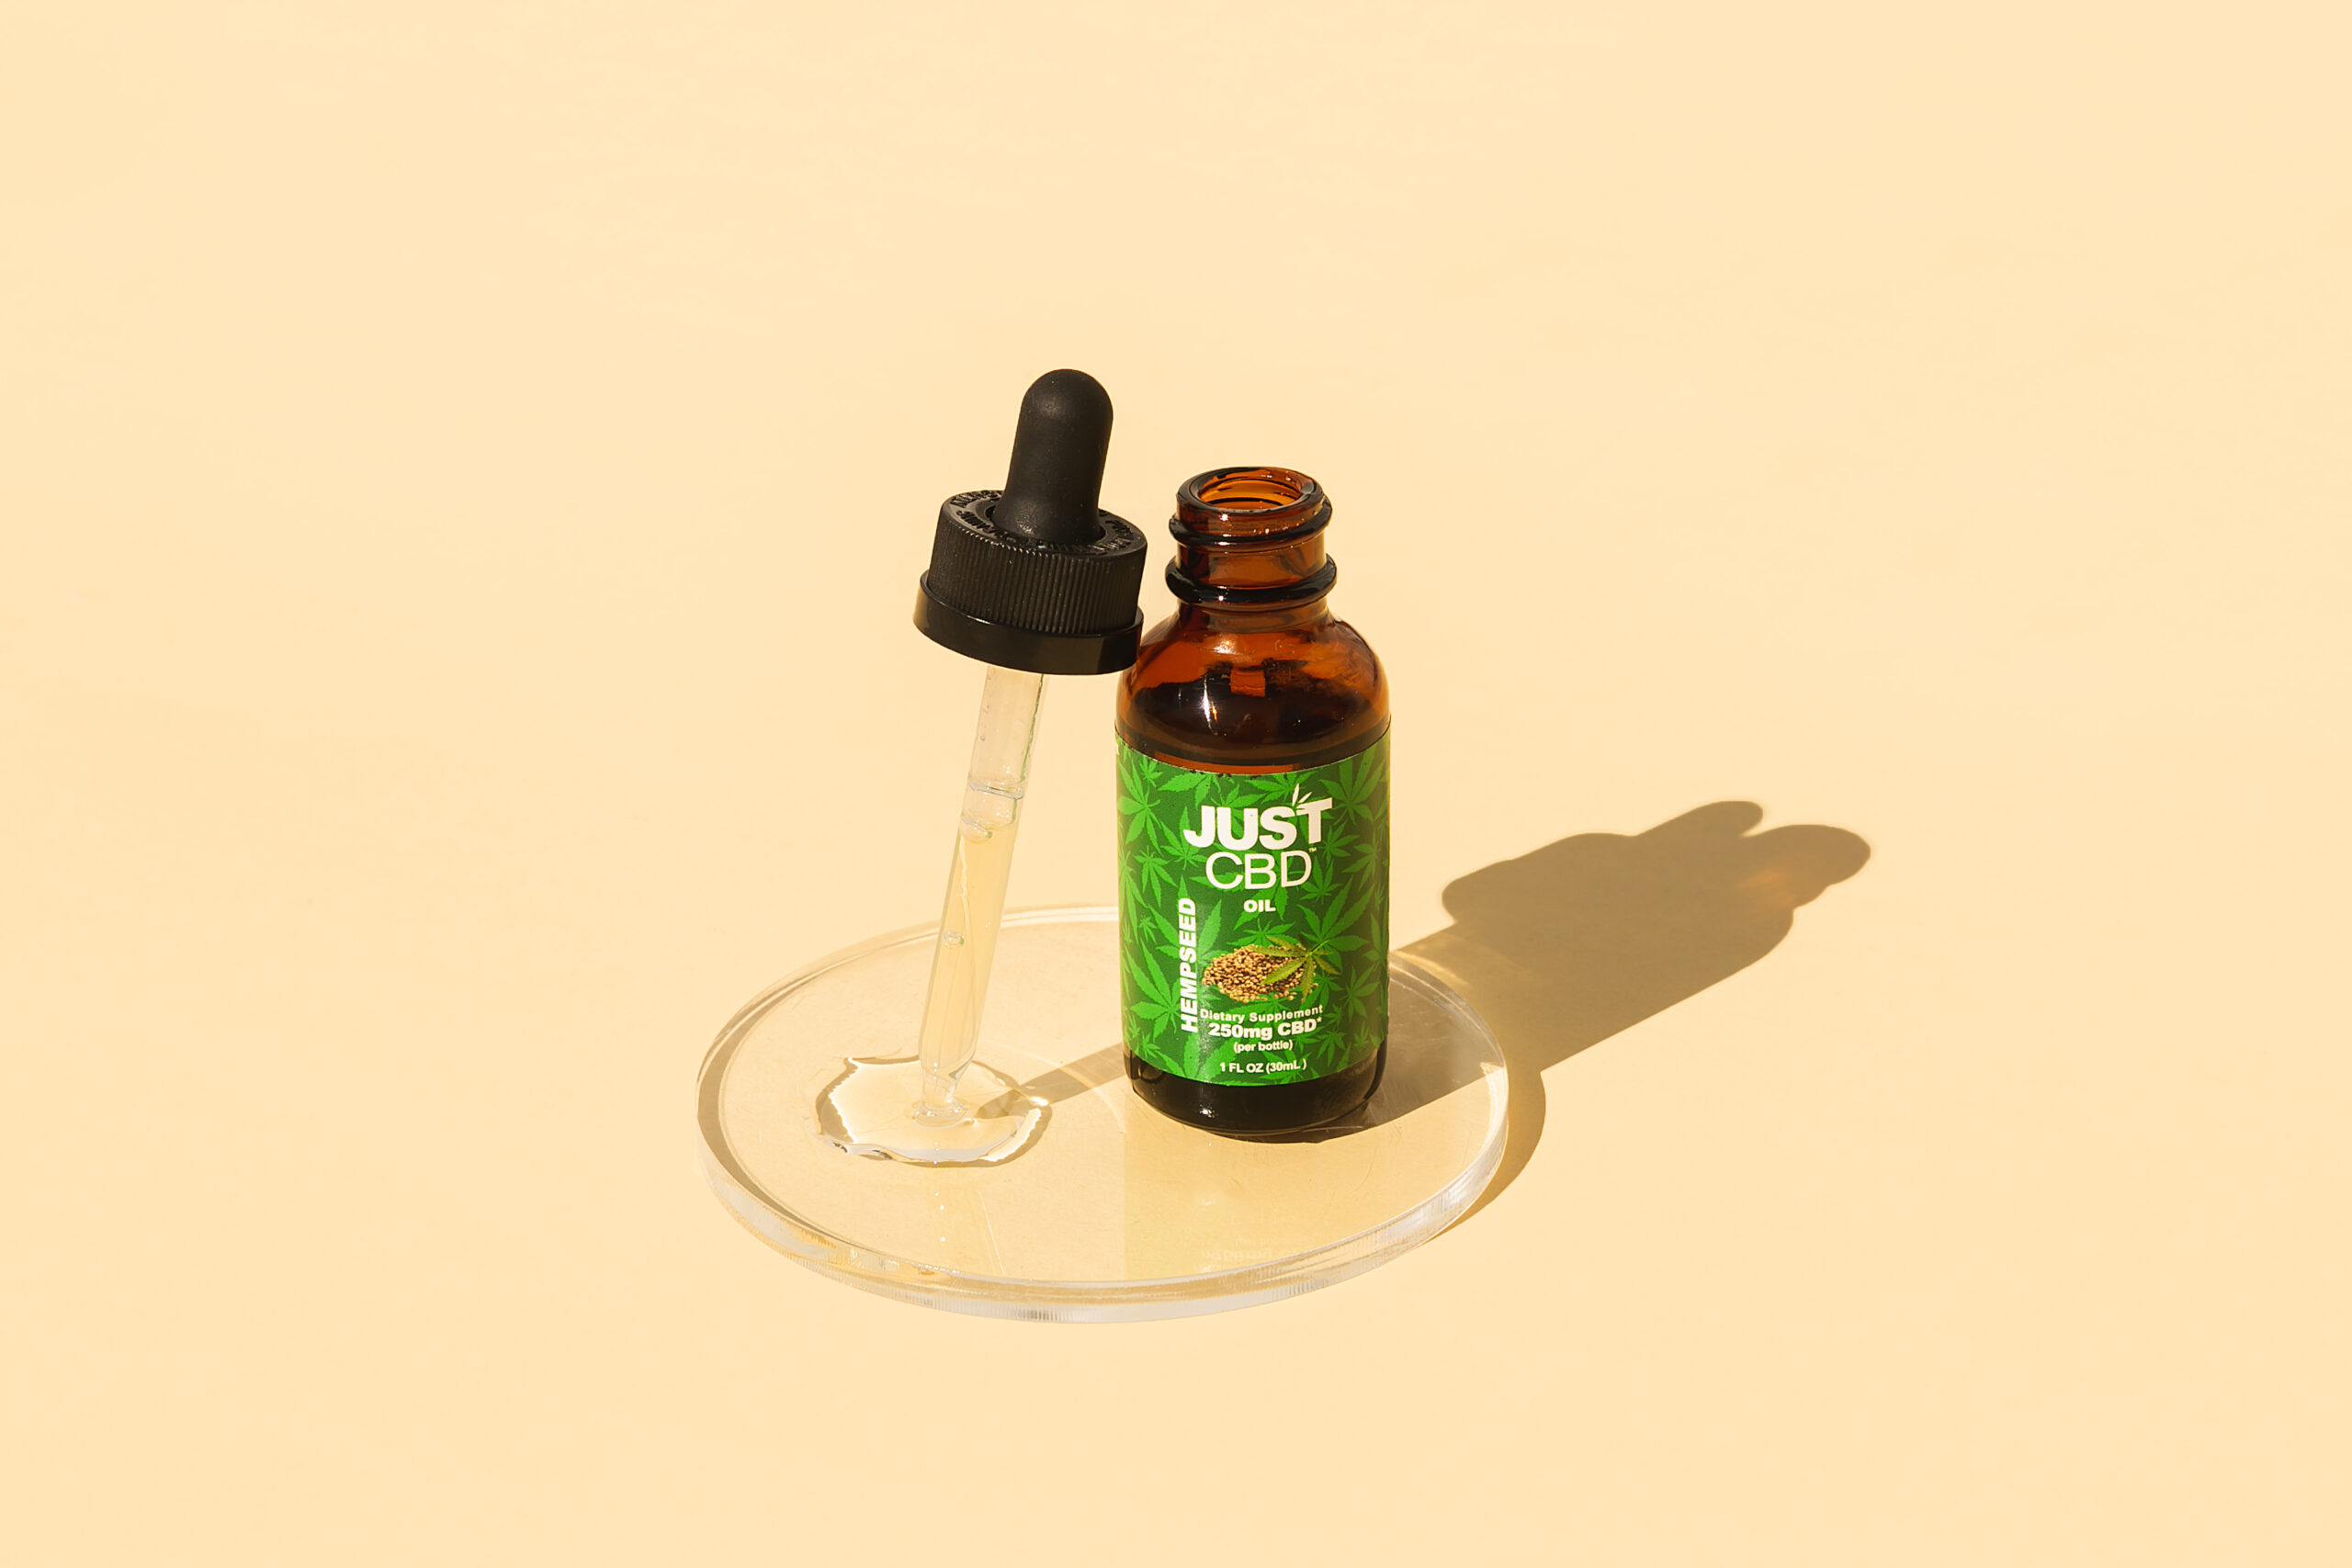 FOUR WAYS TO USE CBD OIL EFFECTIVELY